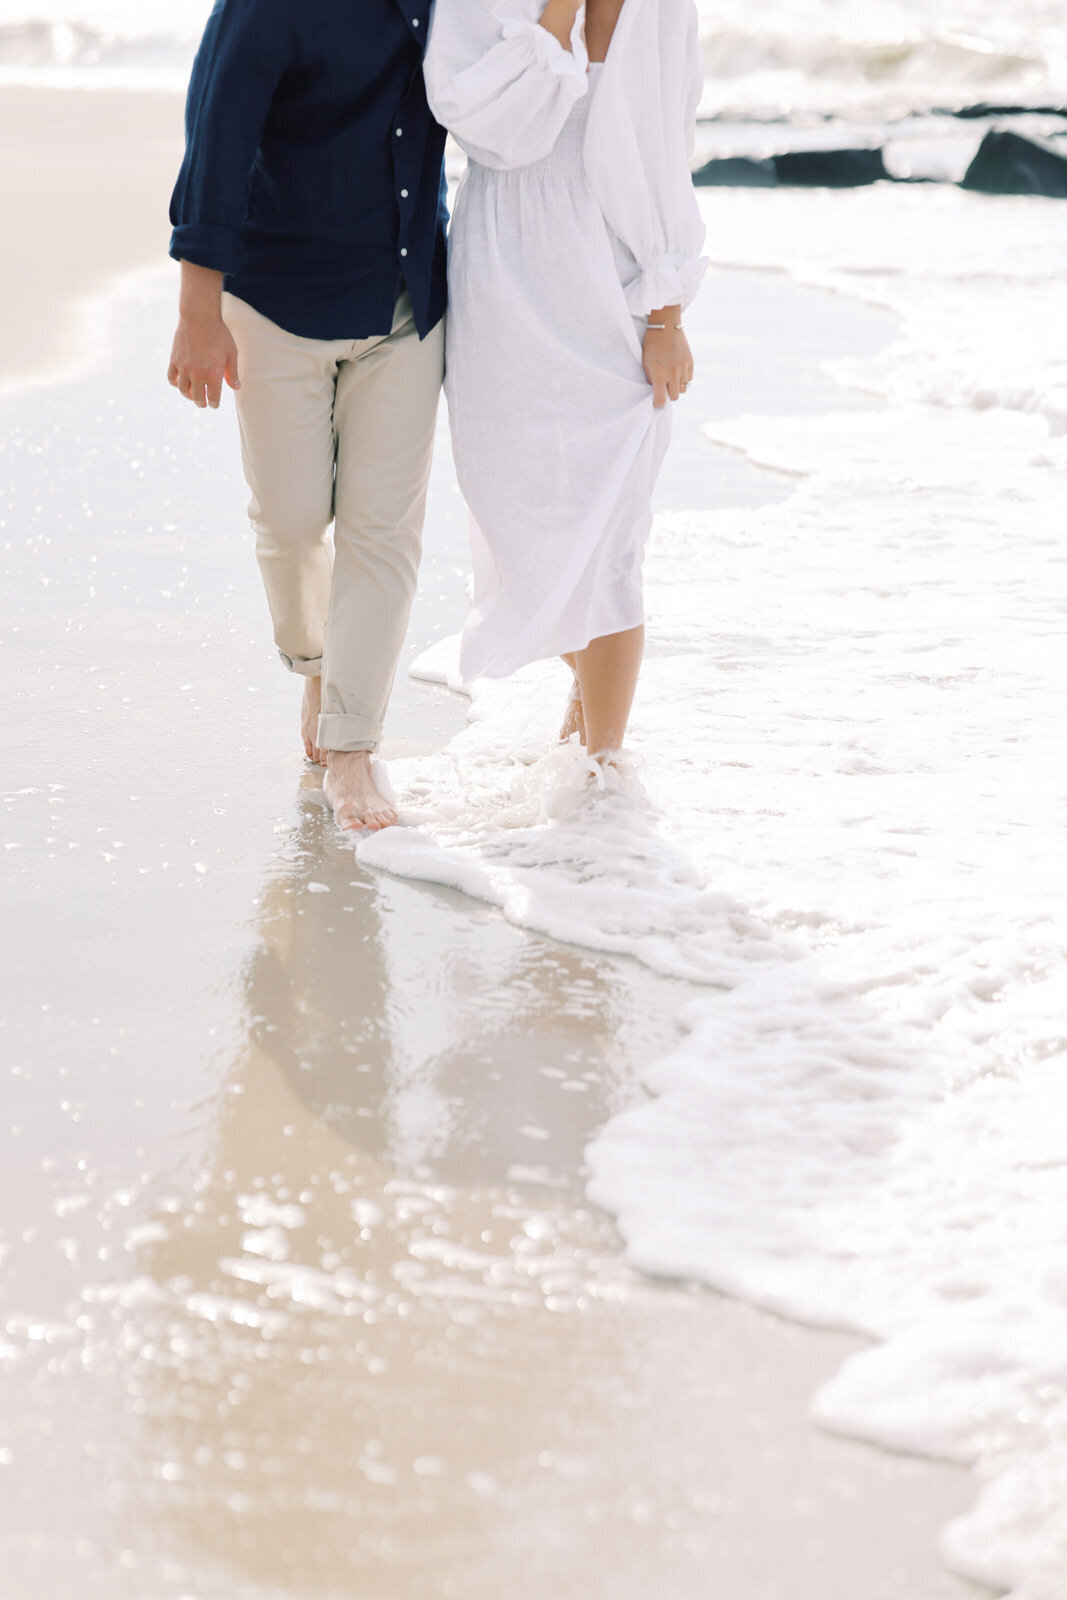 Beach Engagement Session in Cape May New Jersey 42